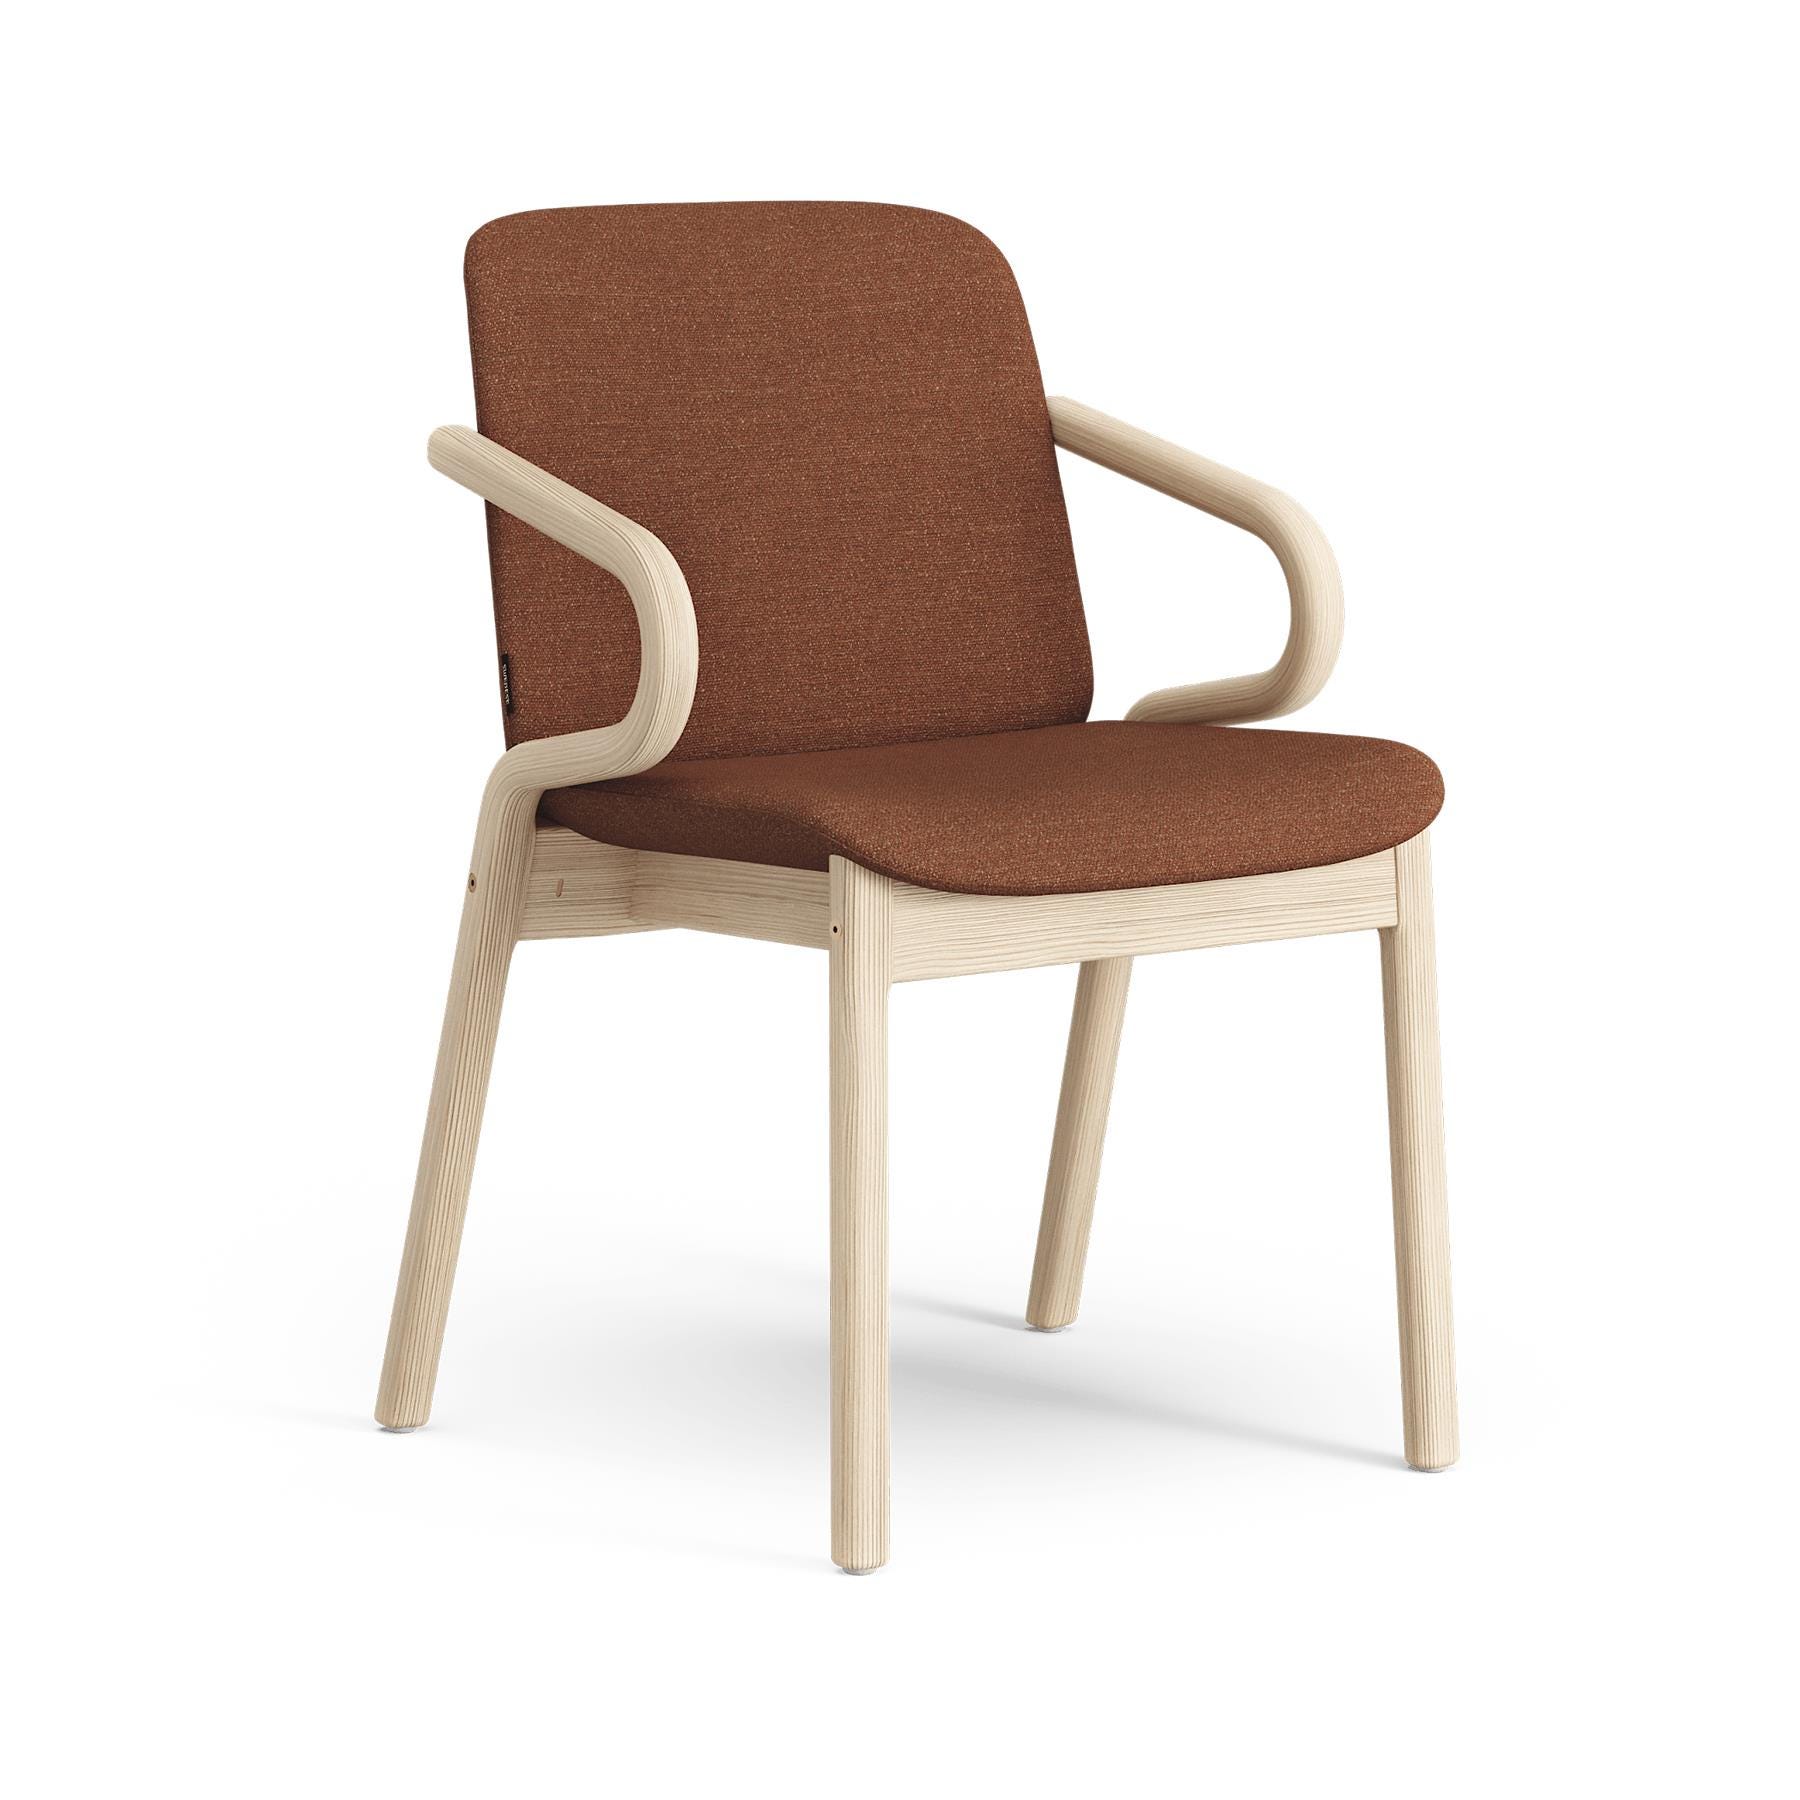 Swedese Amstelle Armchair Natural Ash Ecriture 0570 Red Designer Furniture From Holloways Of Ludlow